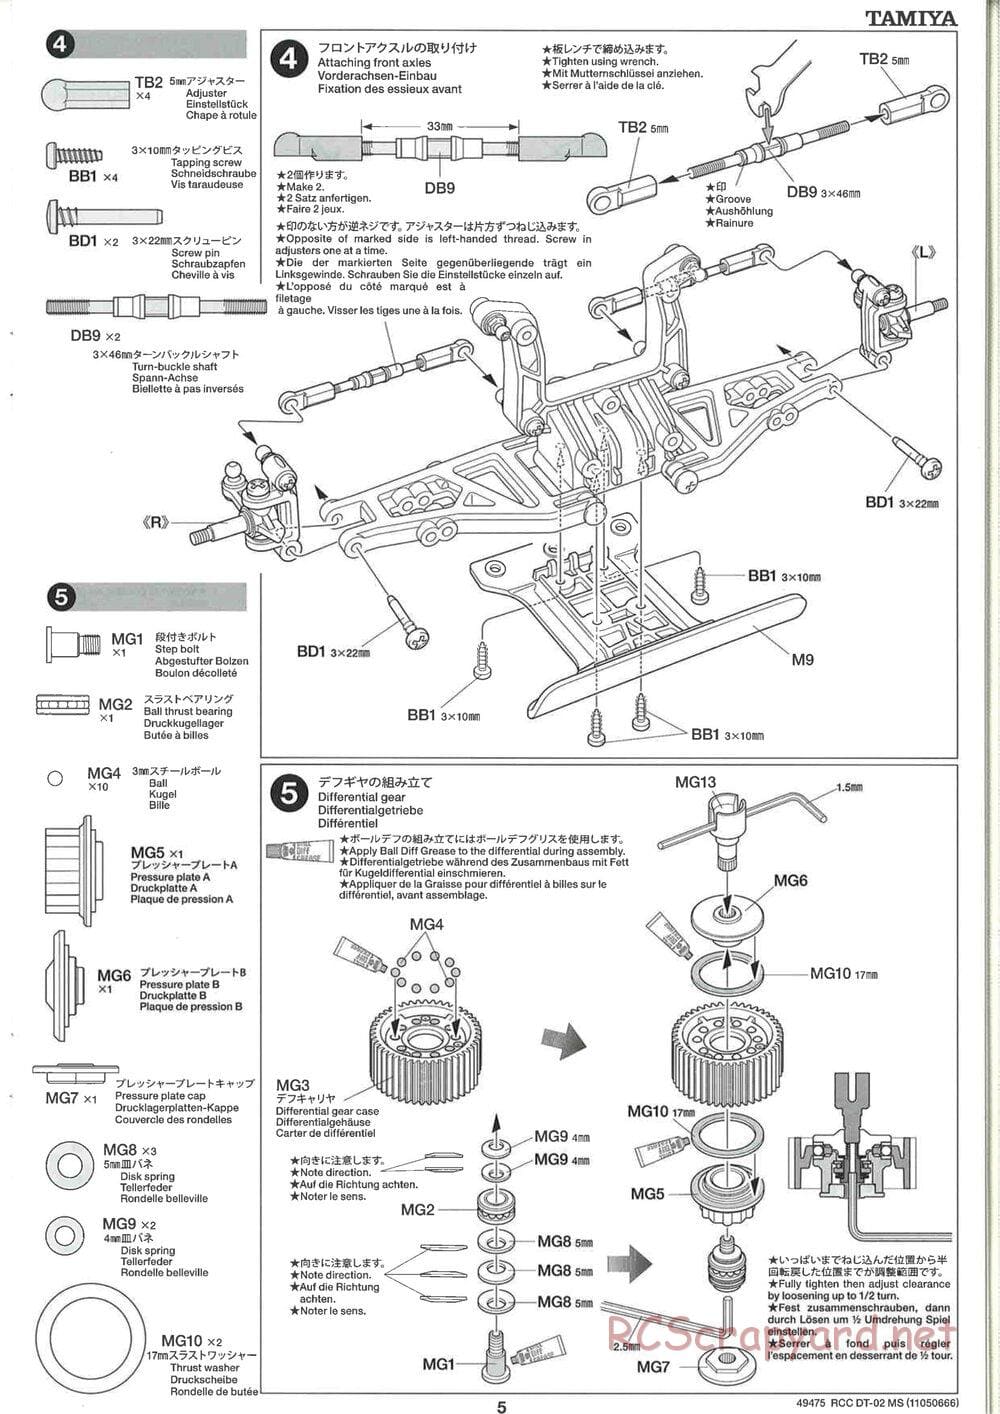 Tamiya - DT-02 MS Chassis - Manual - Page 6